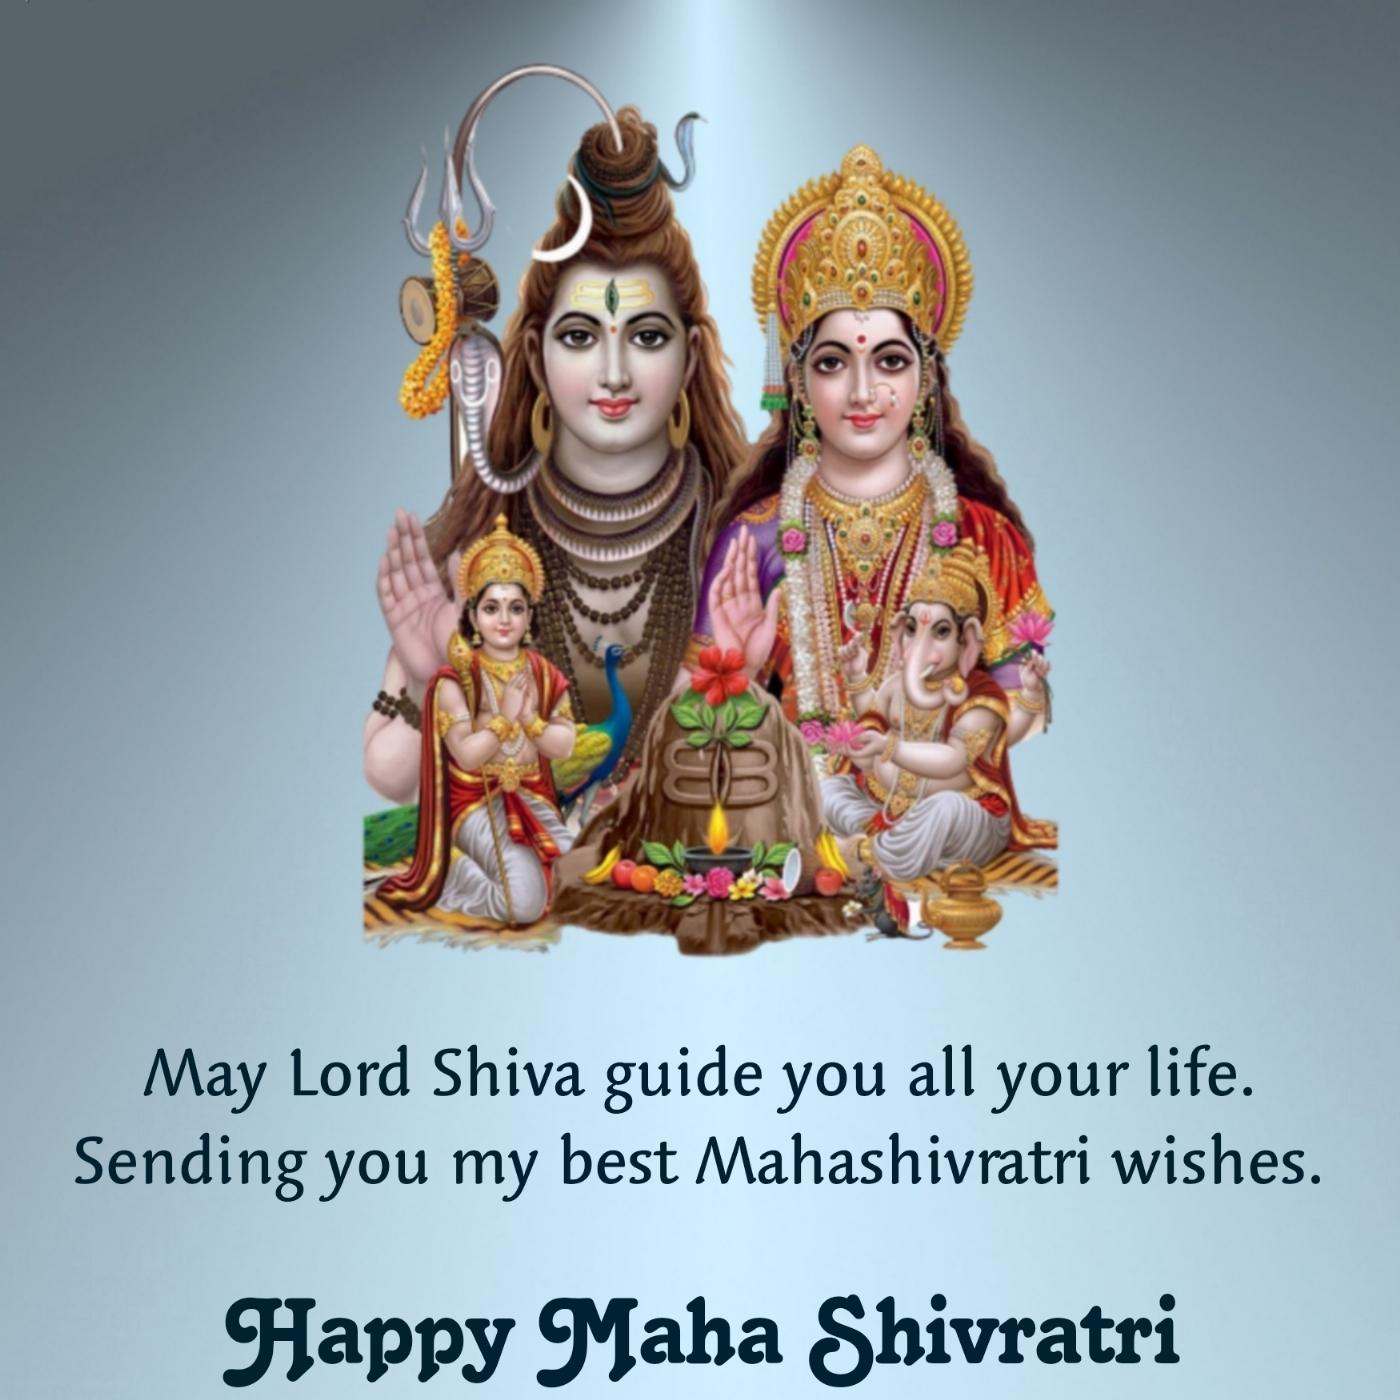 May Lord Shiva guide you all your life Sending you my best Mahashivratri wishes